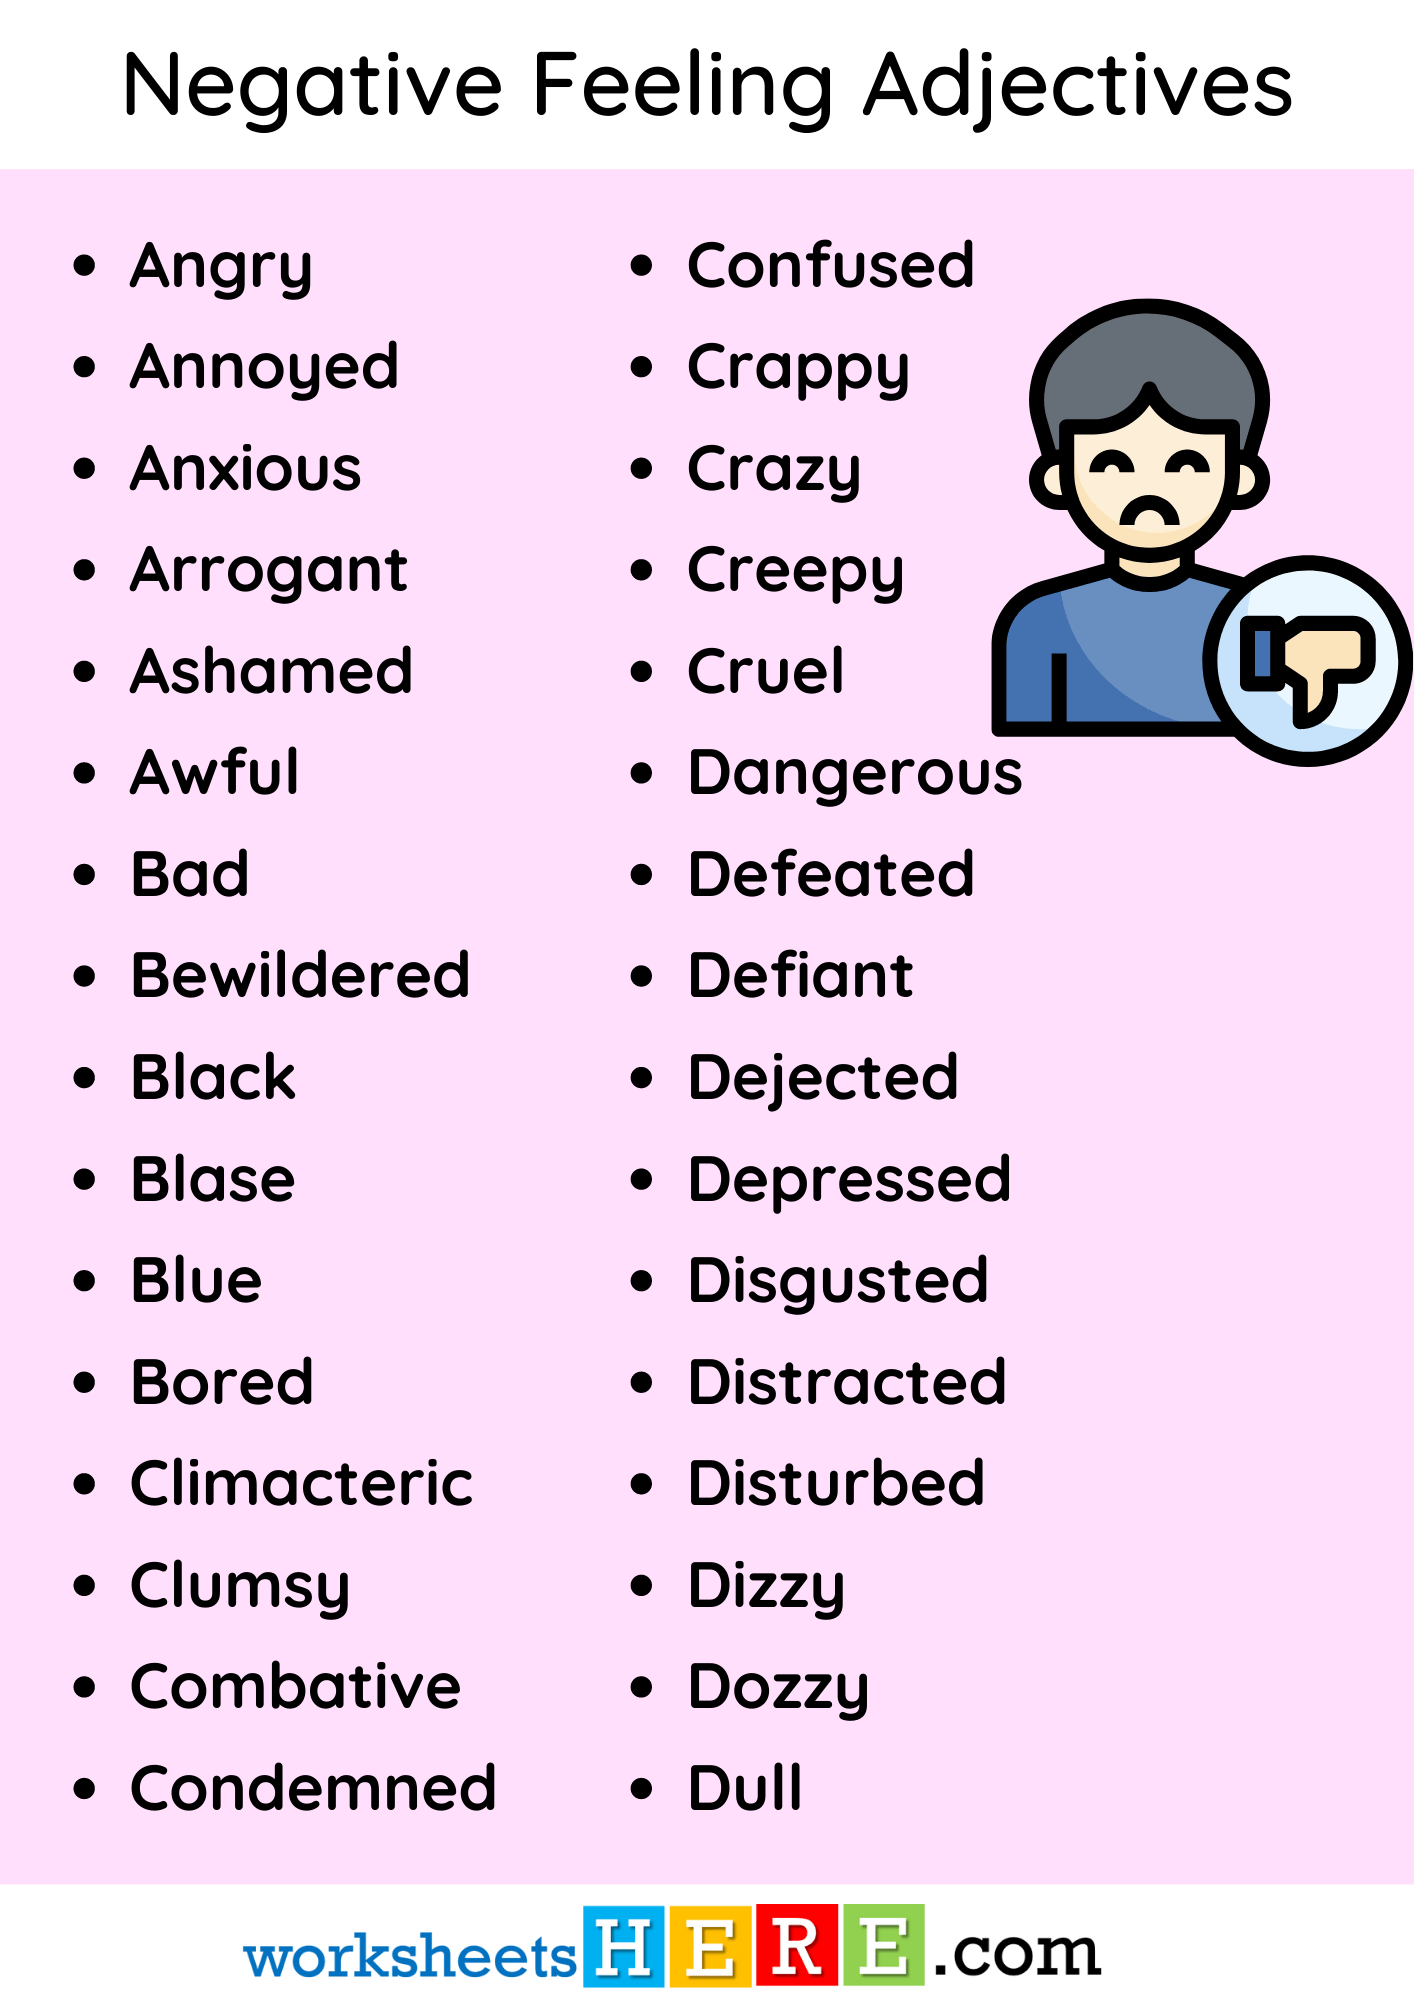 Negative Feeling Adjectives List in English PDF Worksheet For Students and Kids